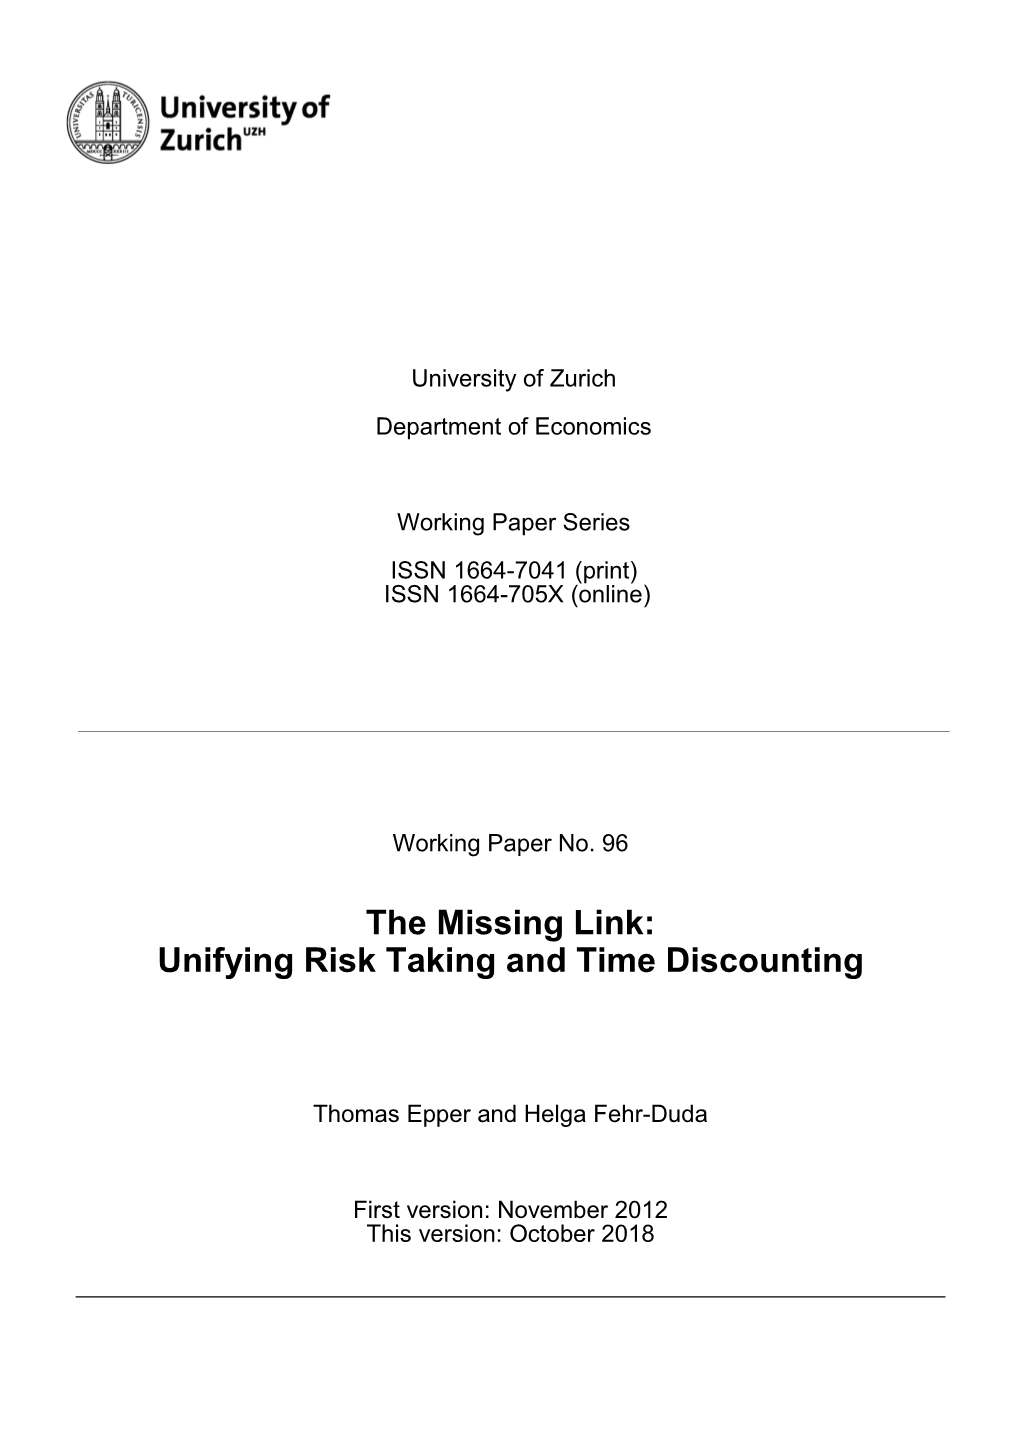 The Missing Link: Unifying Risk Taking and Time Discounting